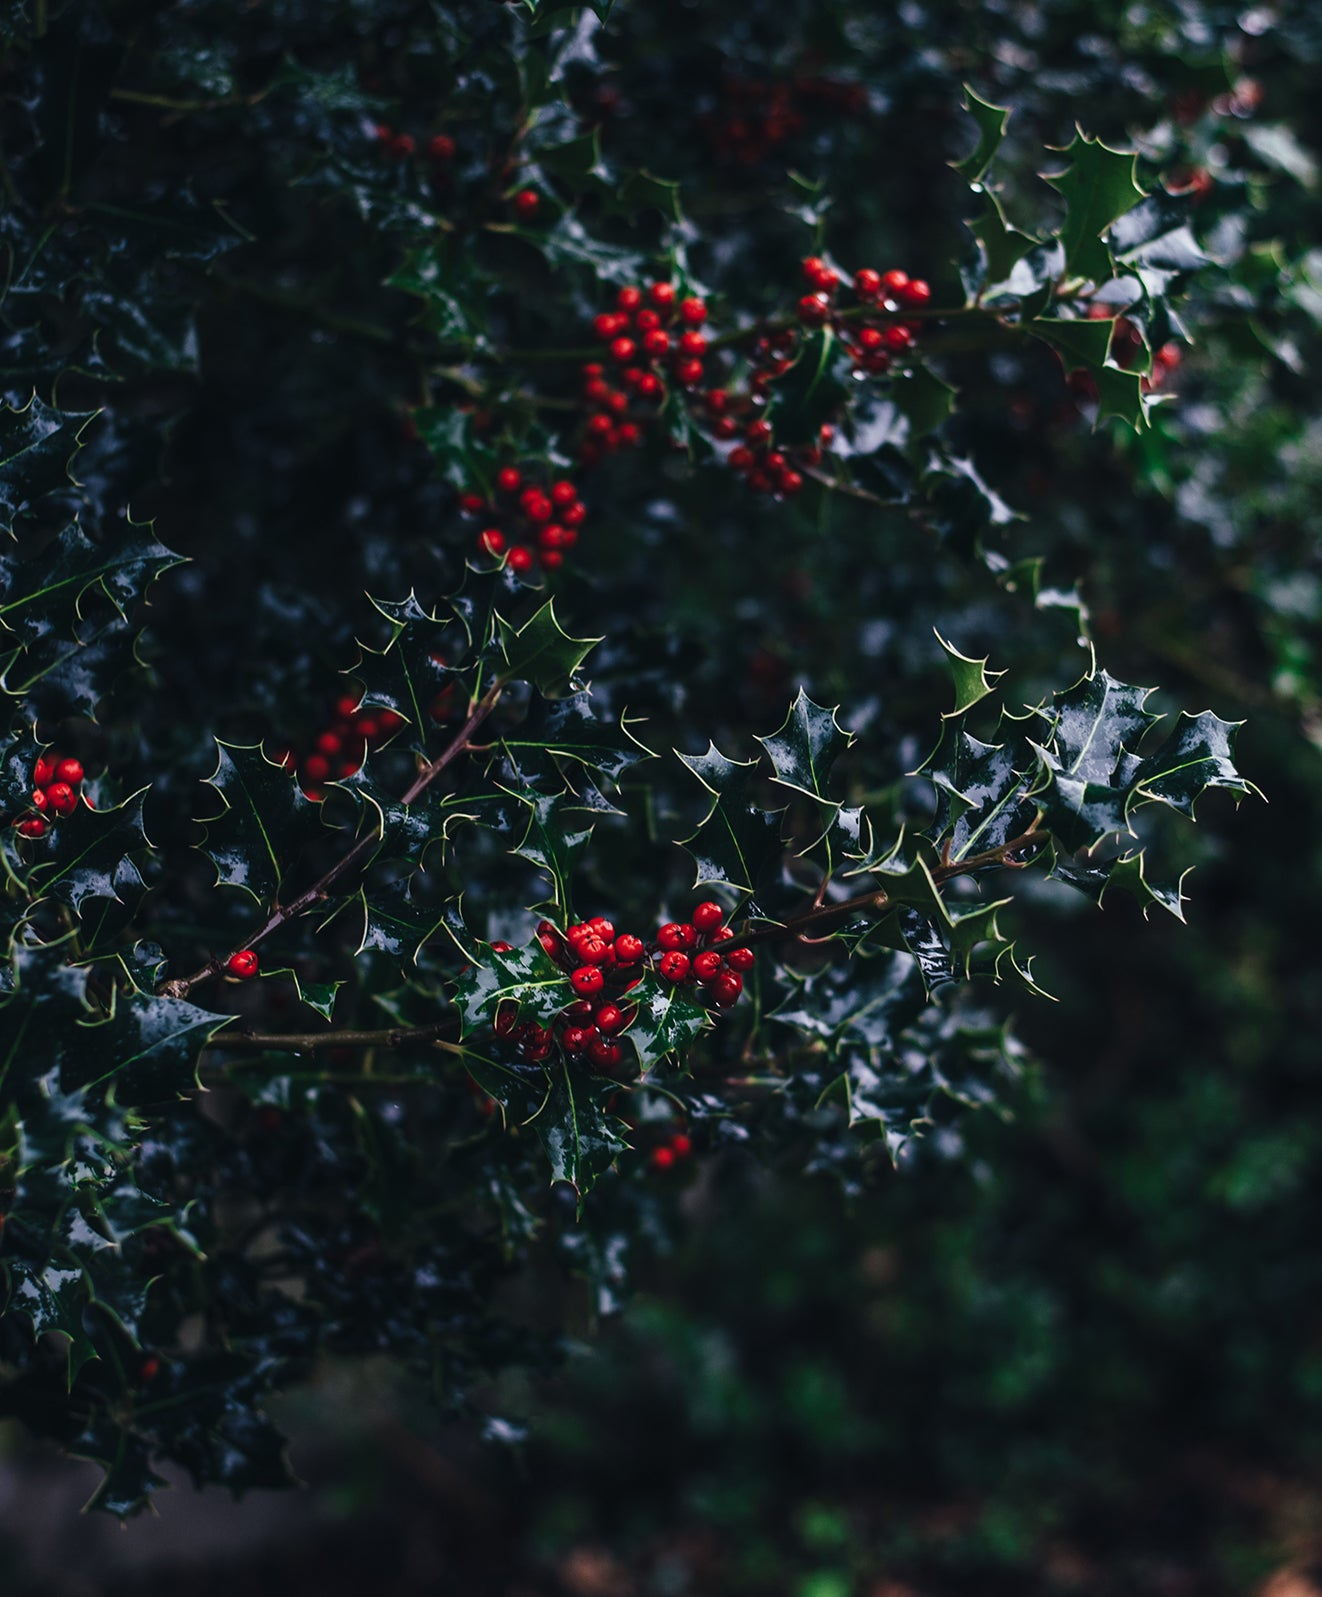 Green holly plant with red berries.